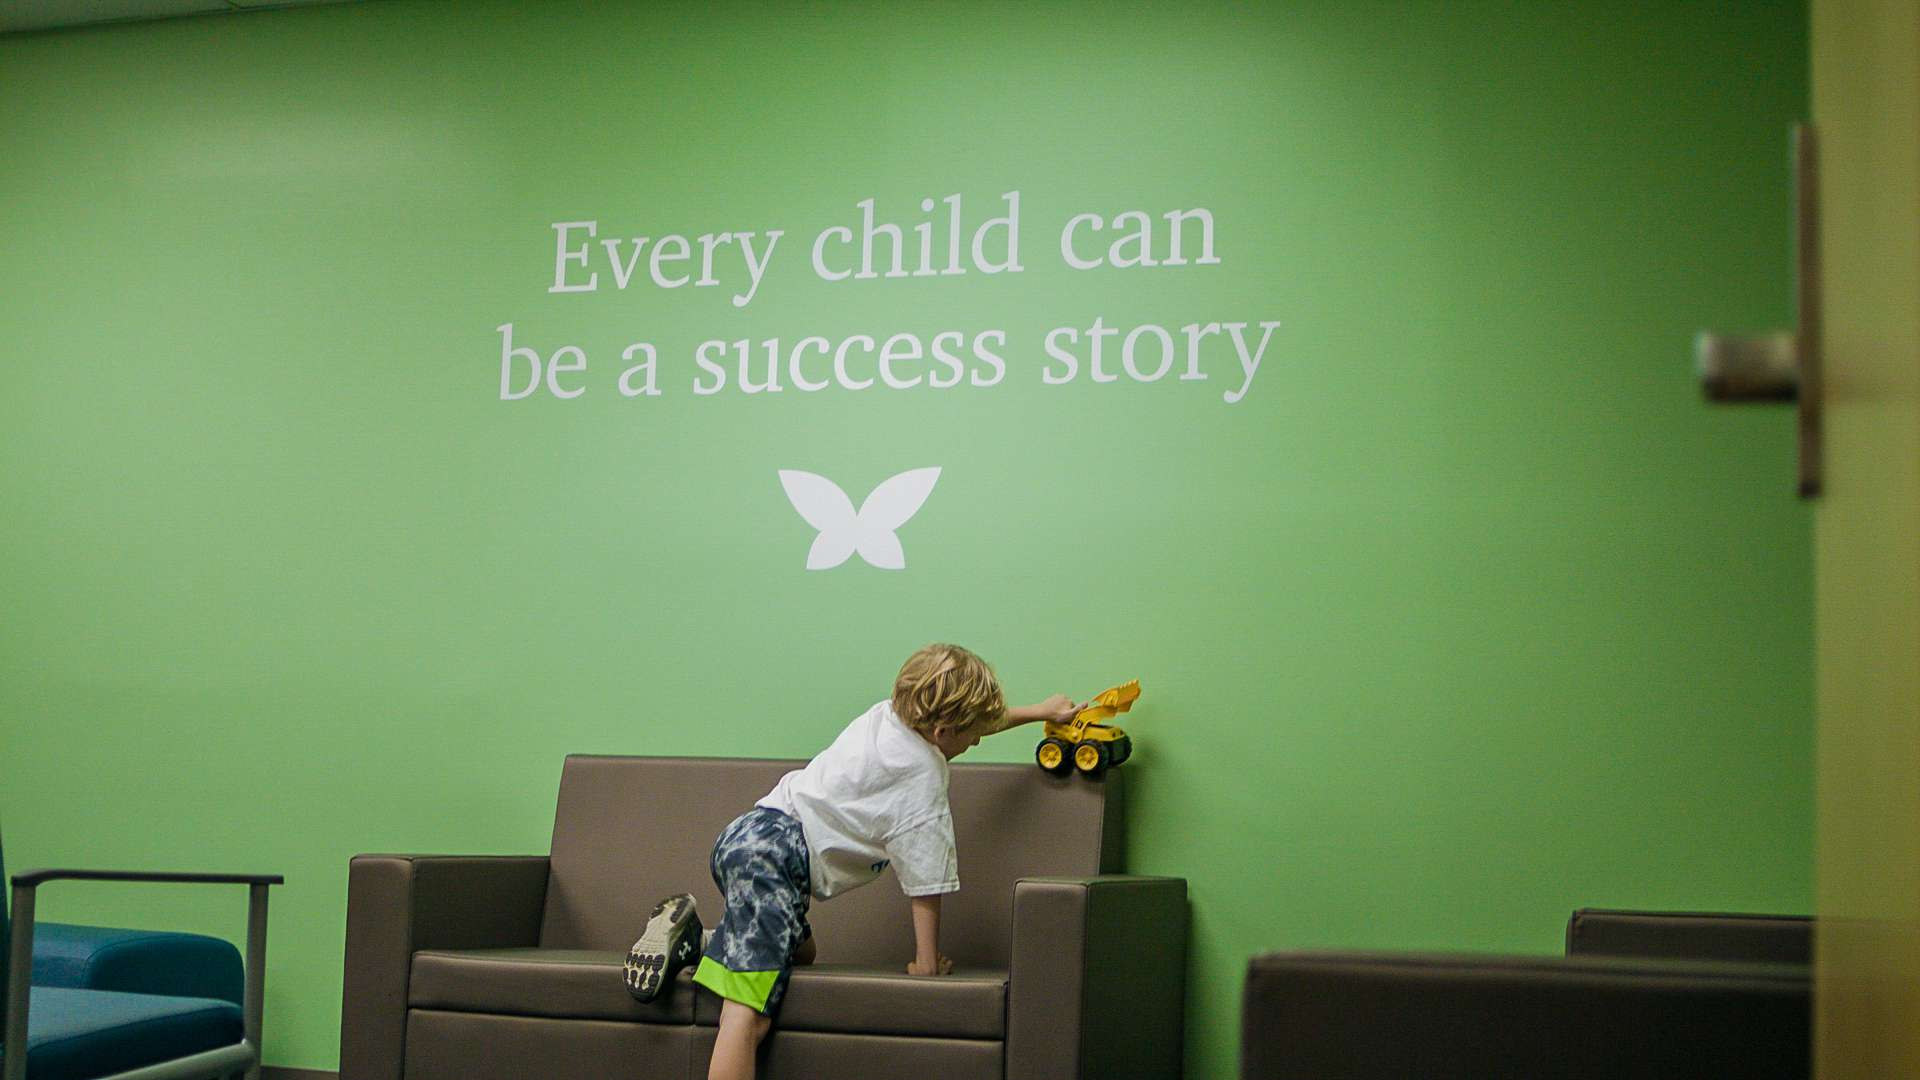 MISSISSIPPI PROFILES: Canopy Children’s Solutions